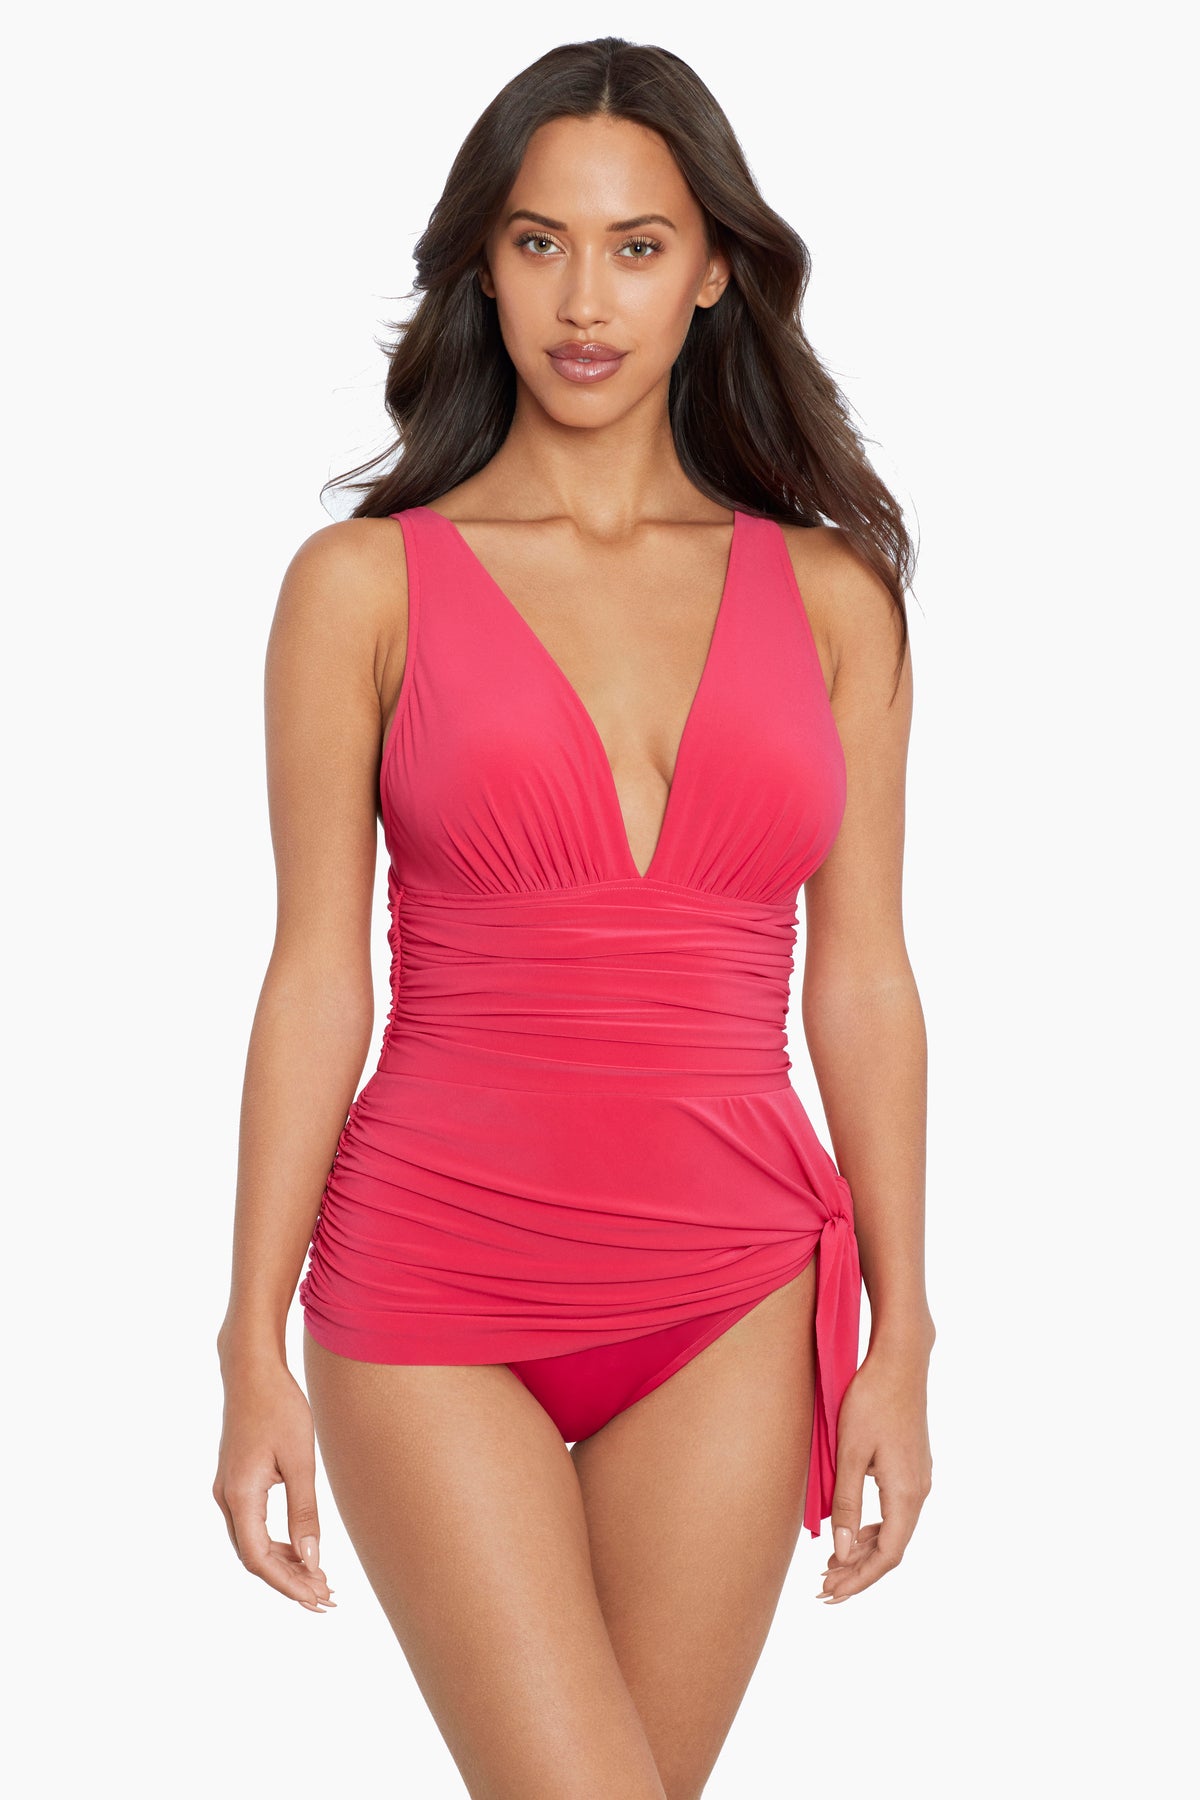 Wear Your Way – Miraclesuit